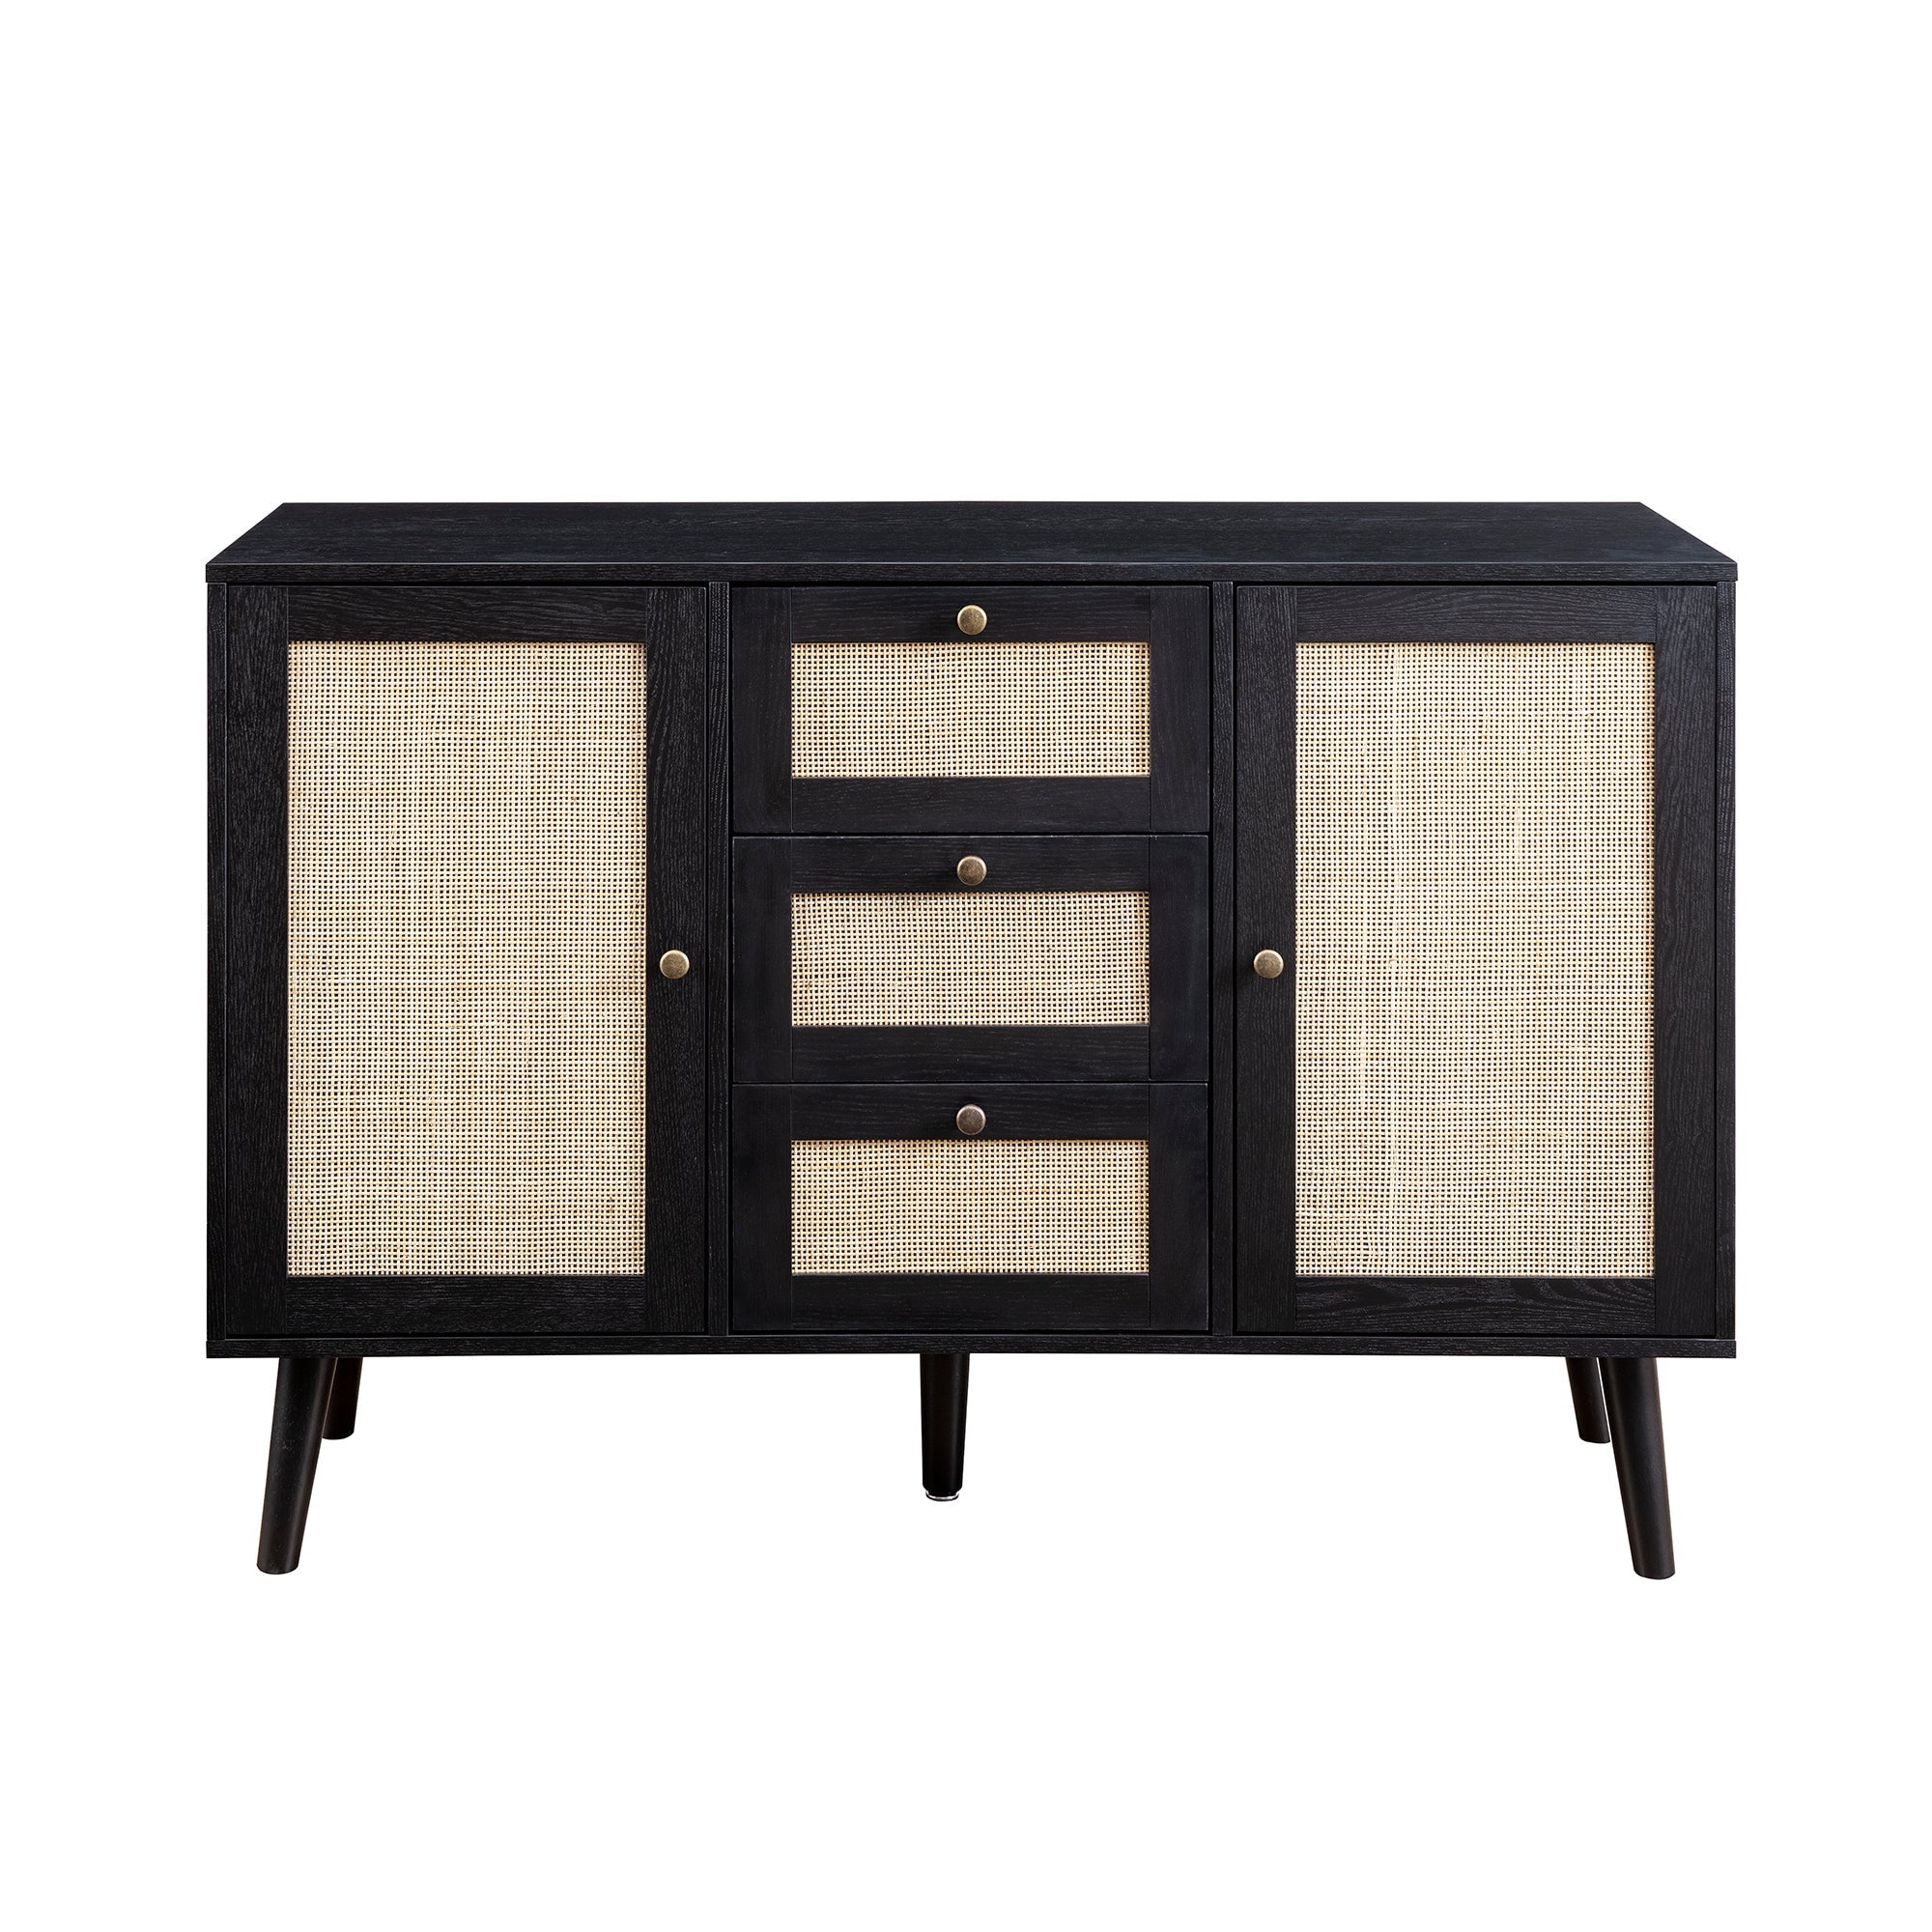 Boho 3 Drawer Solid Wood and Rattan Sideboard